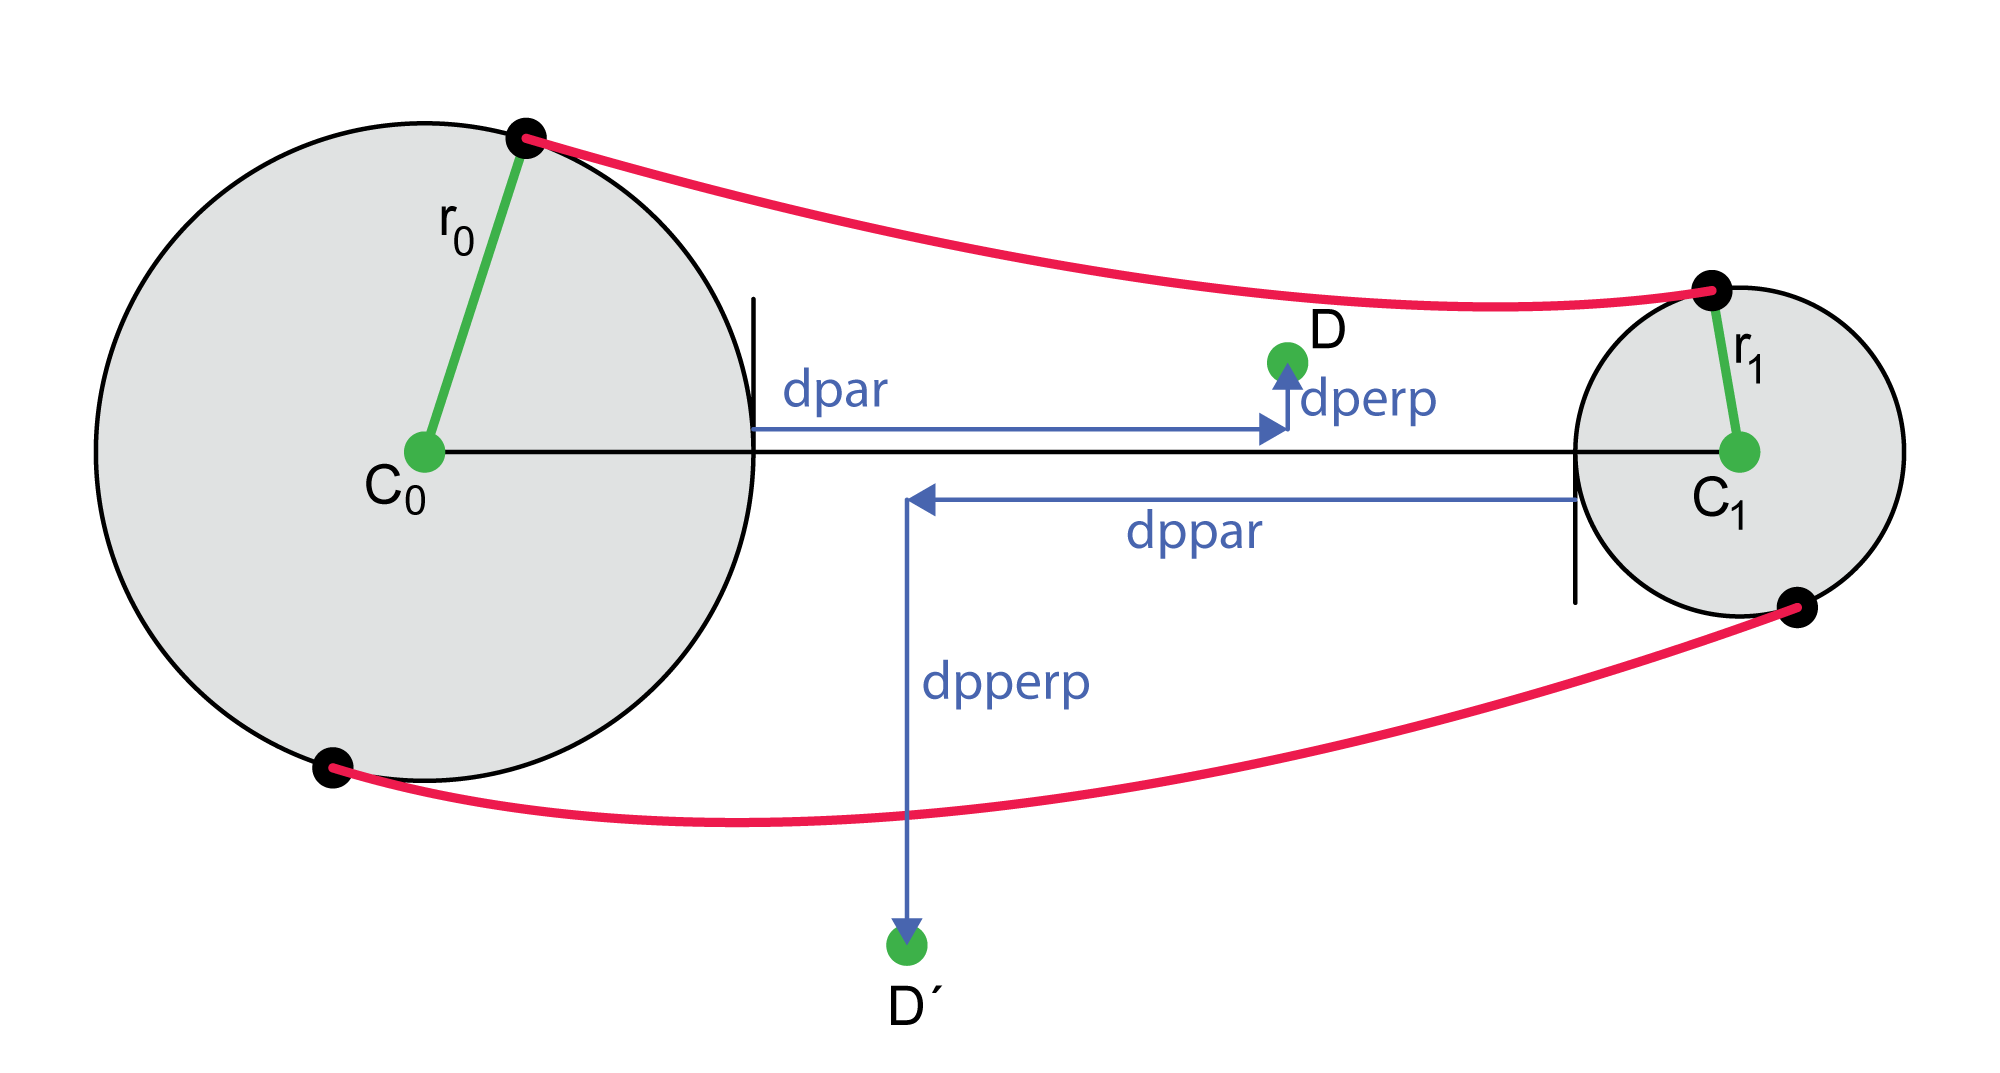 Specifying points D and Dp with floats.